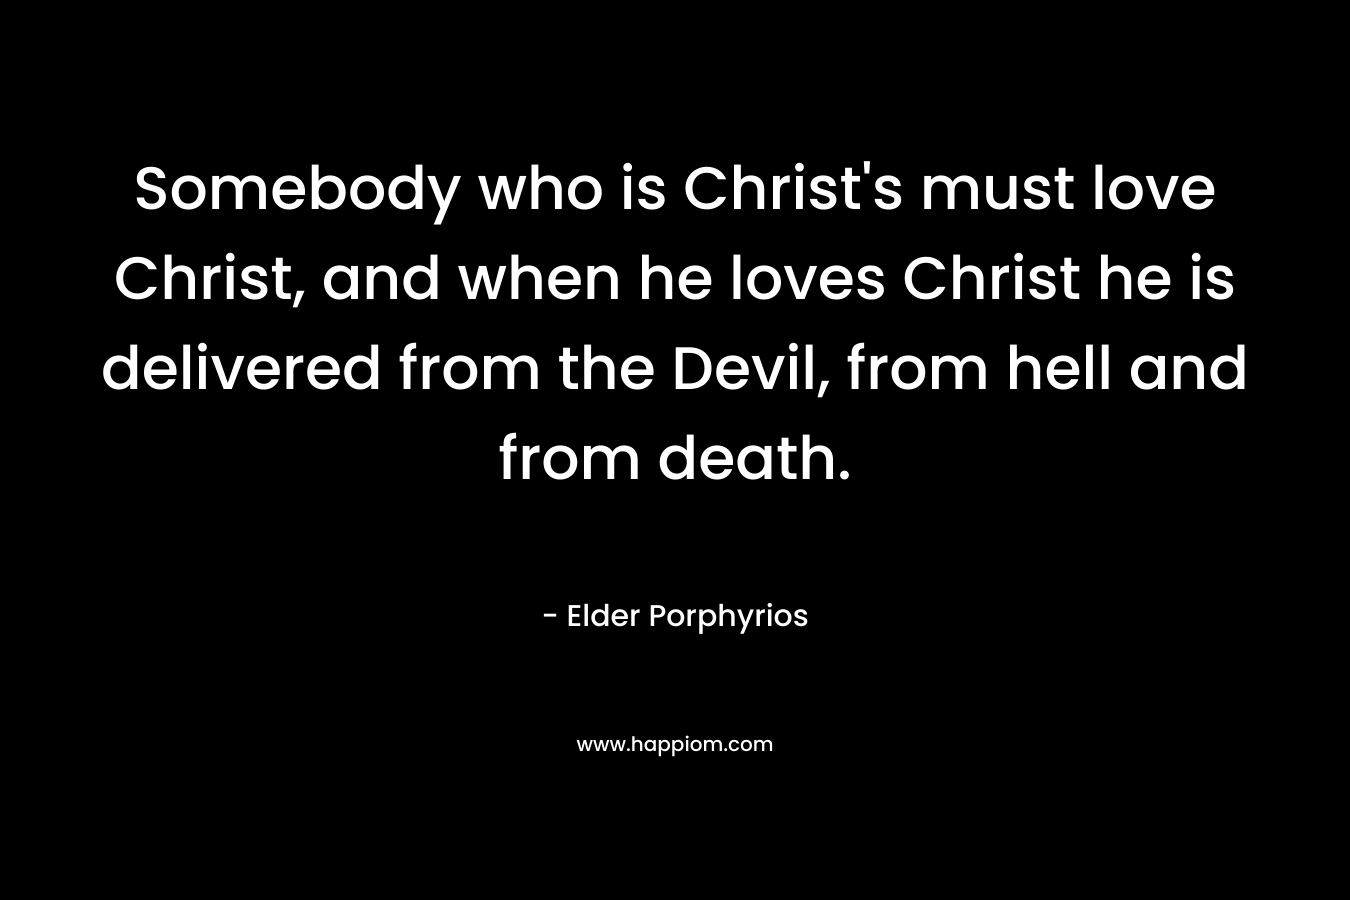 Somebody who is Christ’s must love Christ, and when he loves Christ he is delivered from the Devil, from hell and from death. – Elder Porphyrios